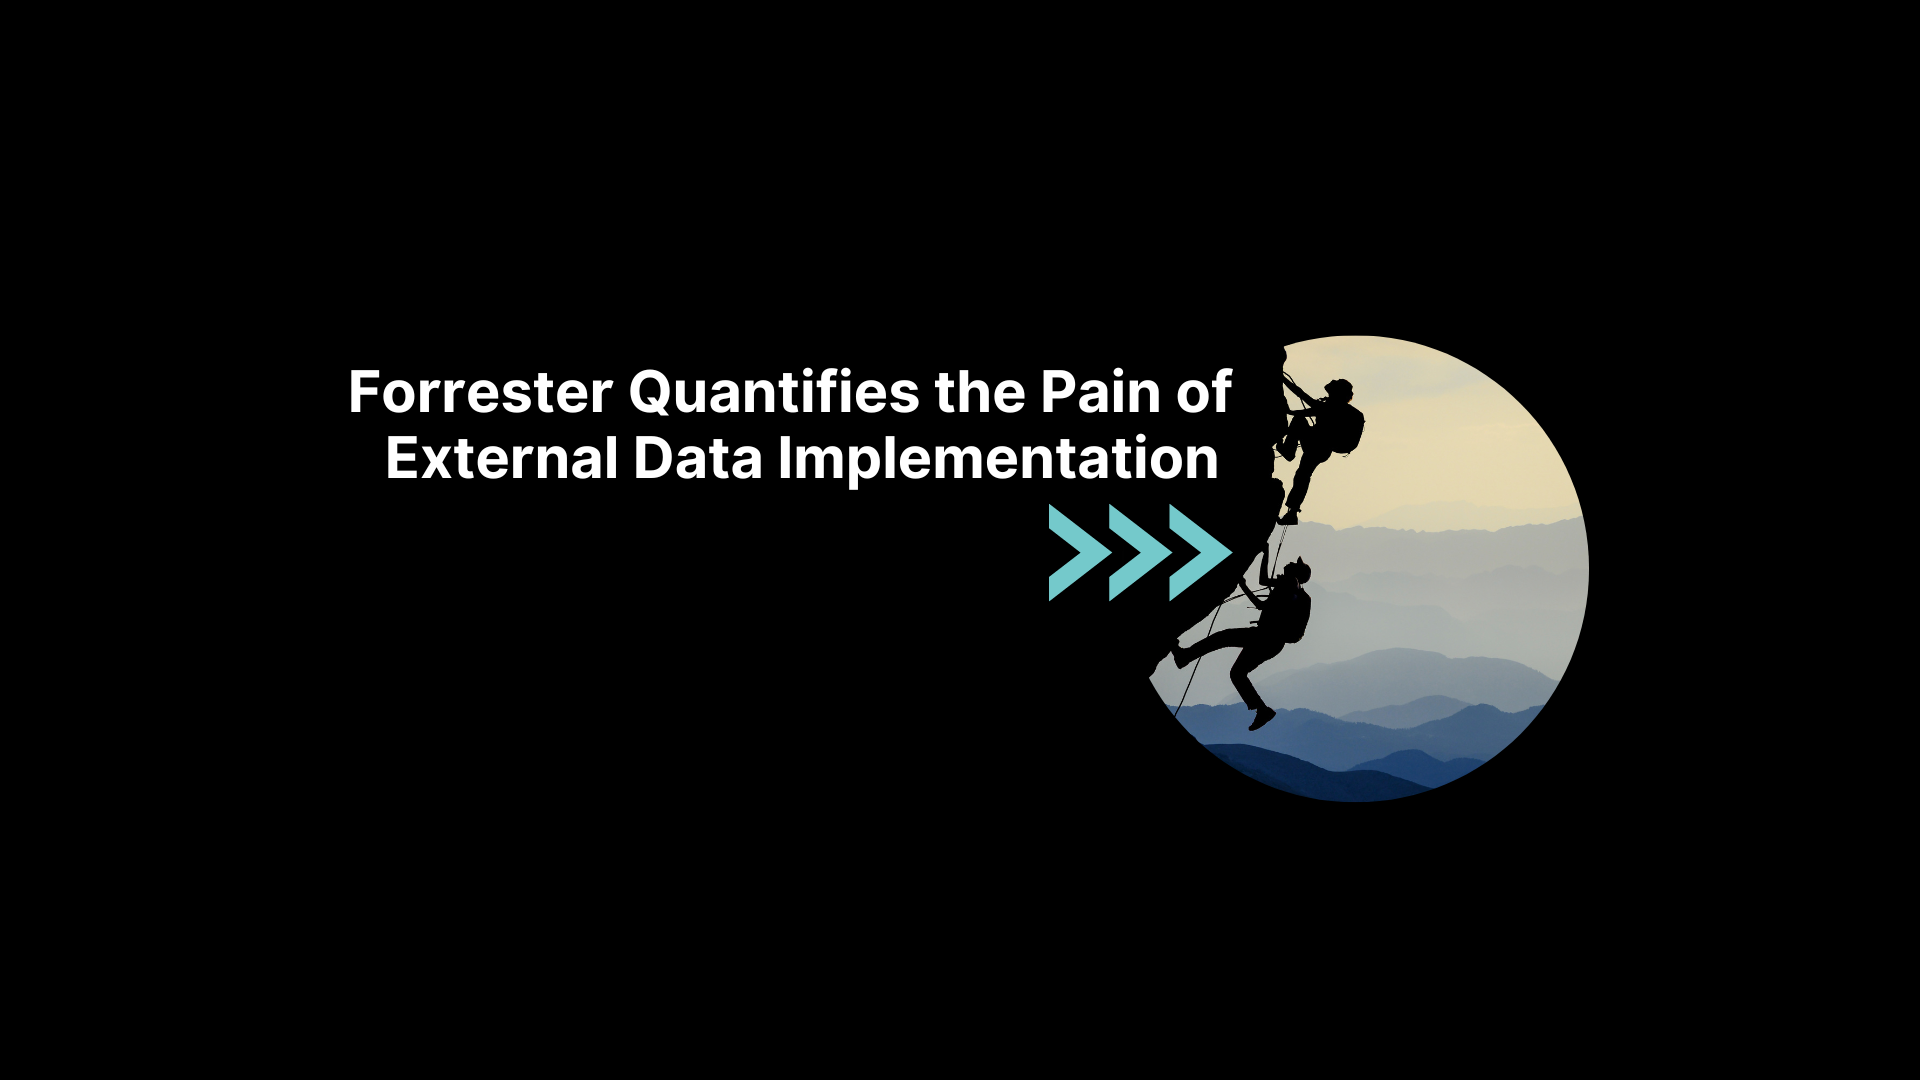 Forrester Research Reveals Data Teams Spend 70% of Their Time on Prep & Plumbing of External Data